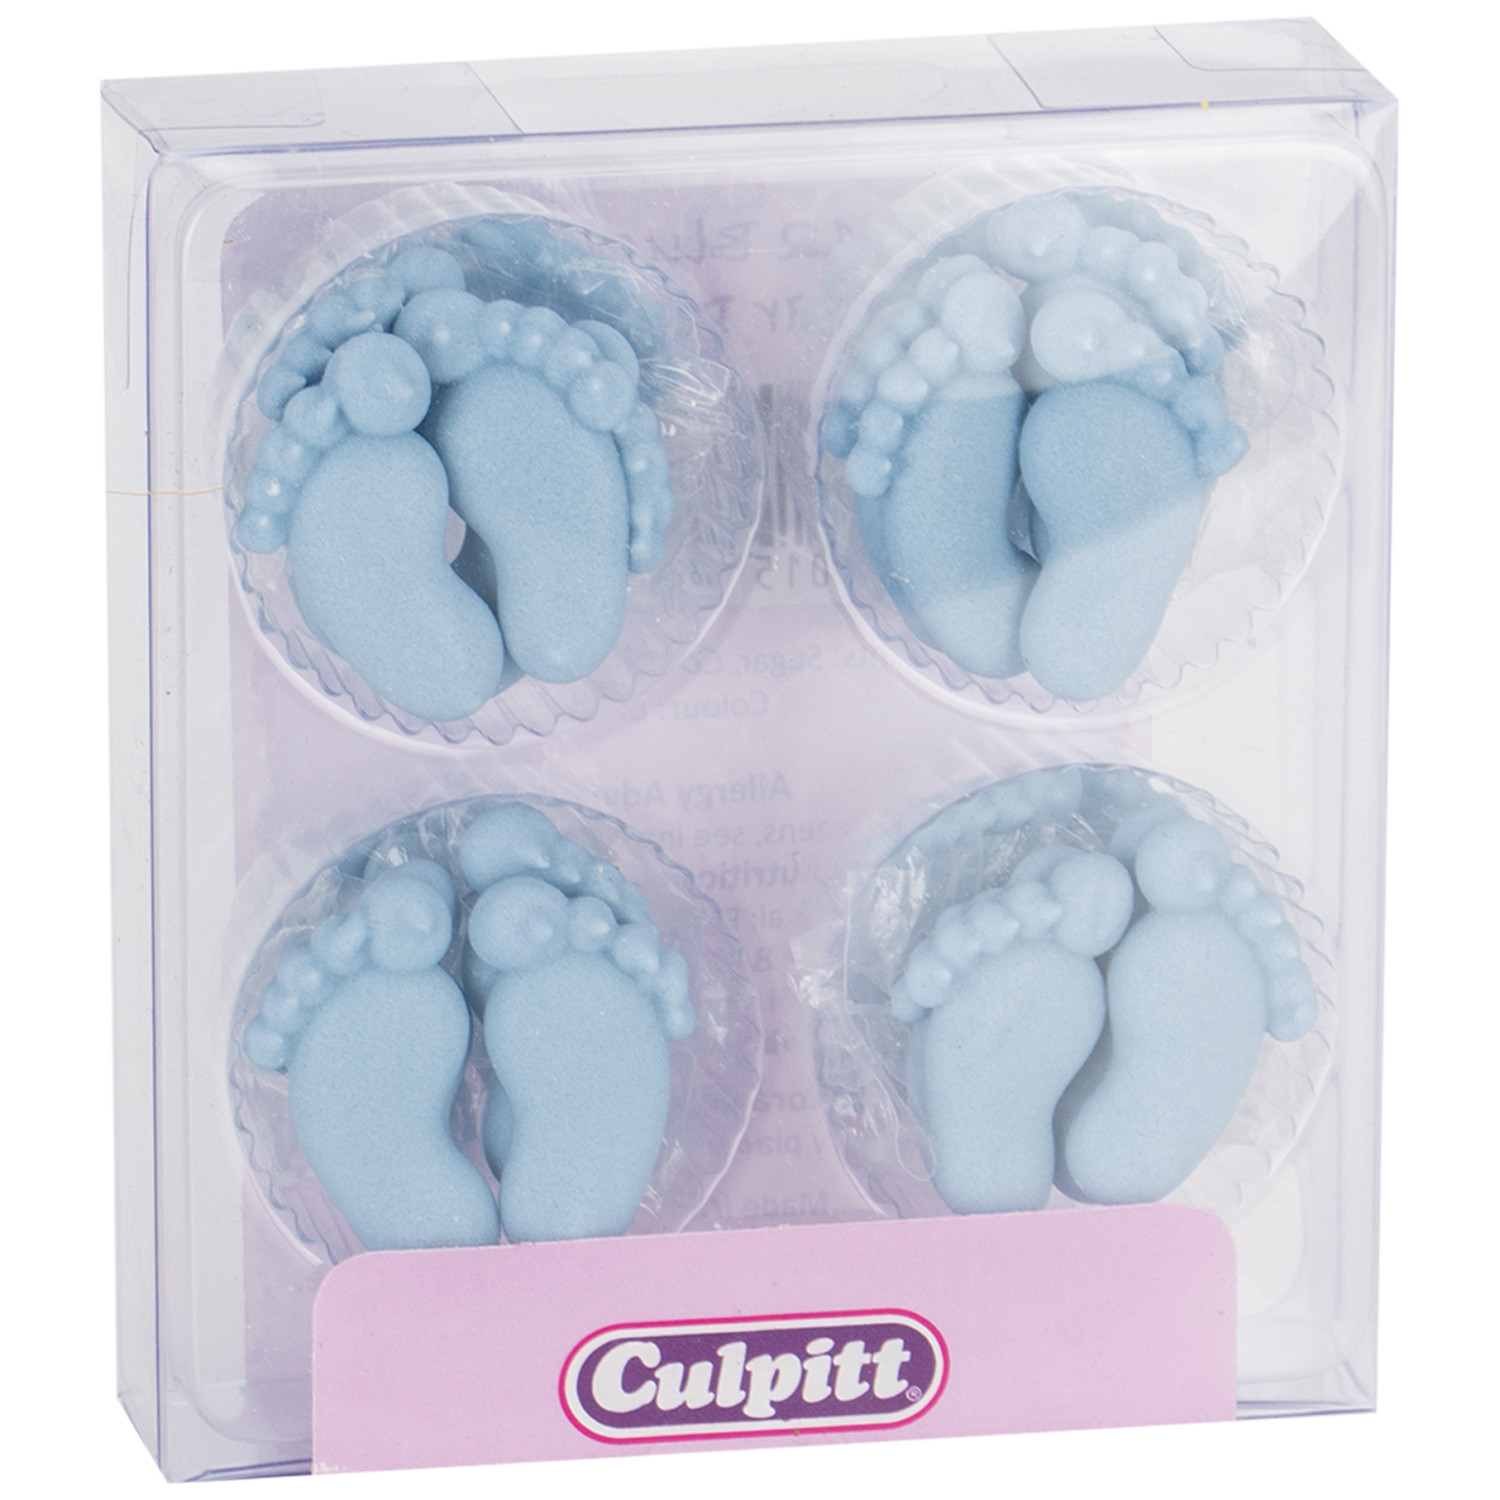 Pack of 12 Decorational Sugar Pipings - Blue Feet Image